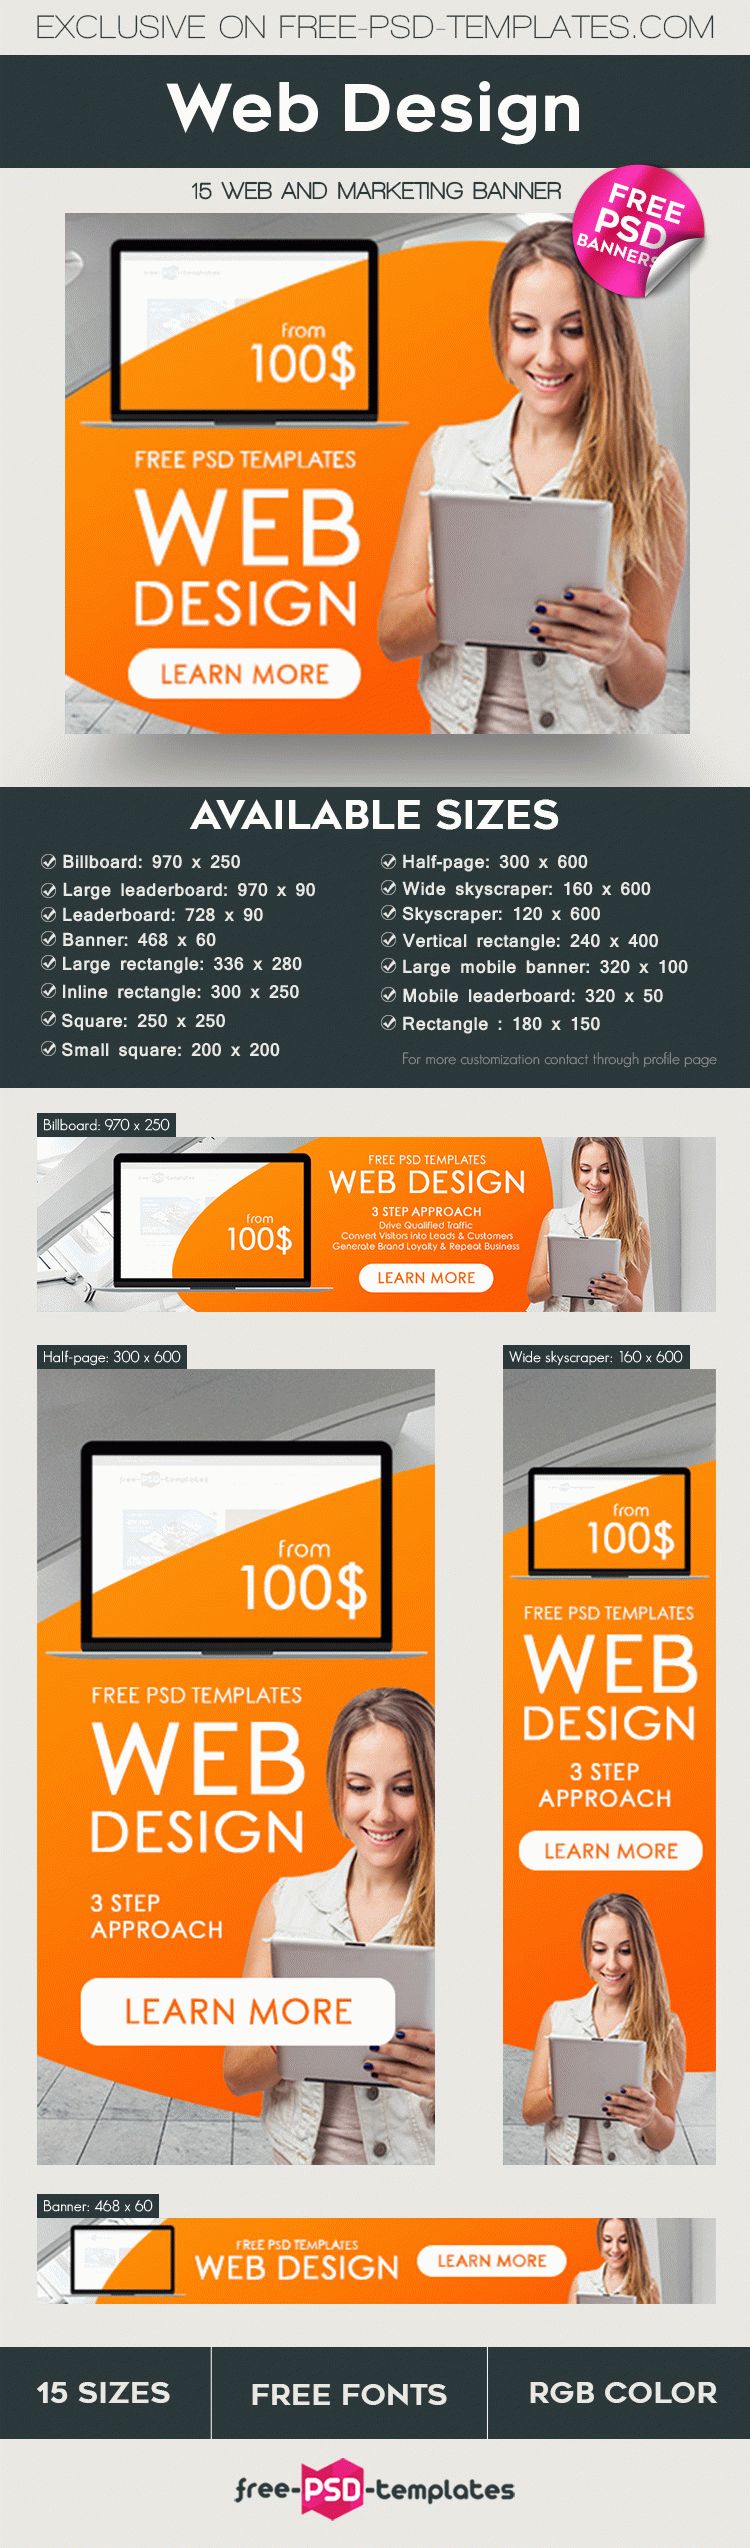 Download 15 Free Web Design Banners Collection in PSD | Free PSD Templates